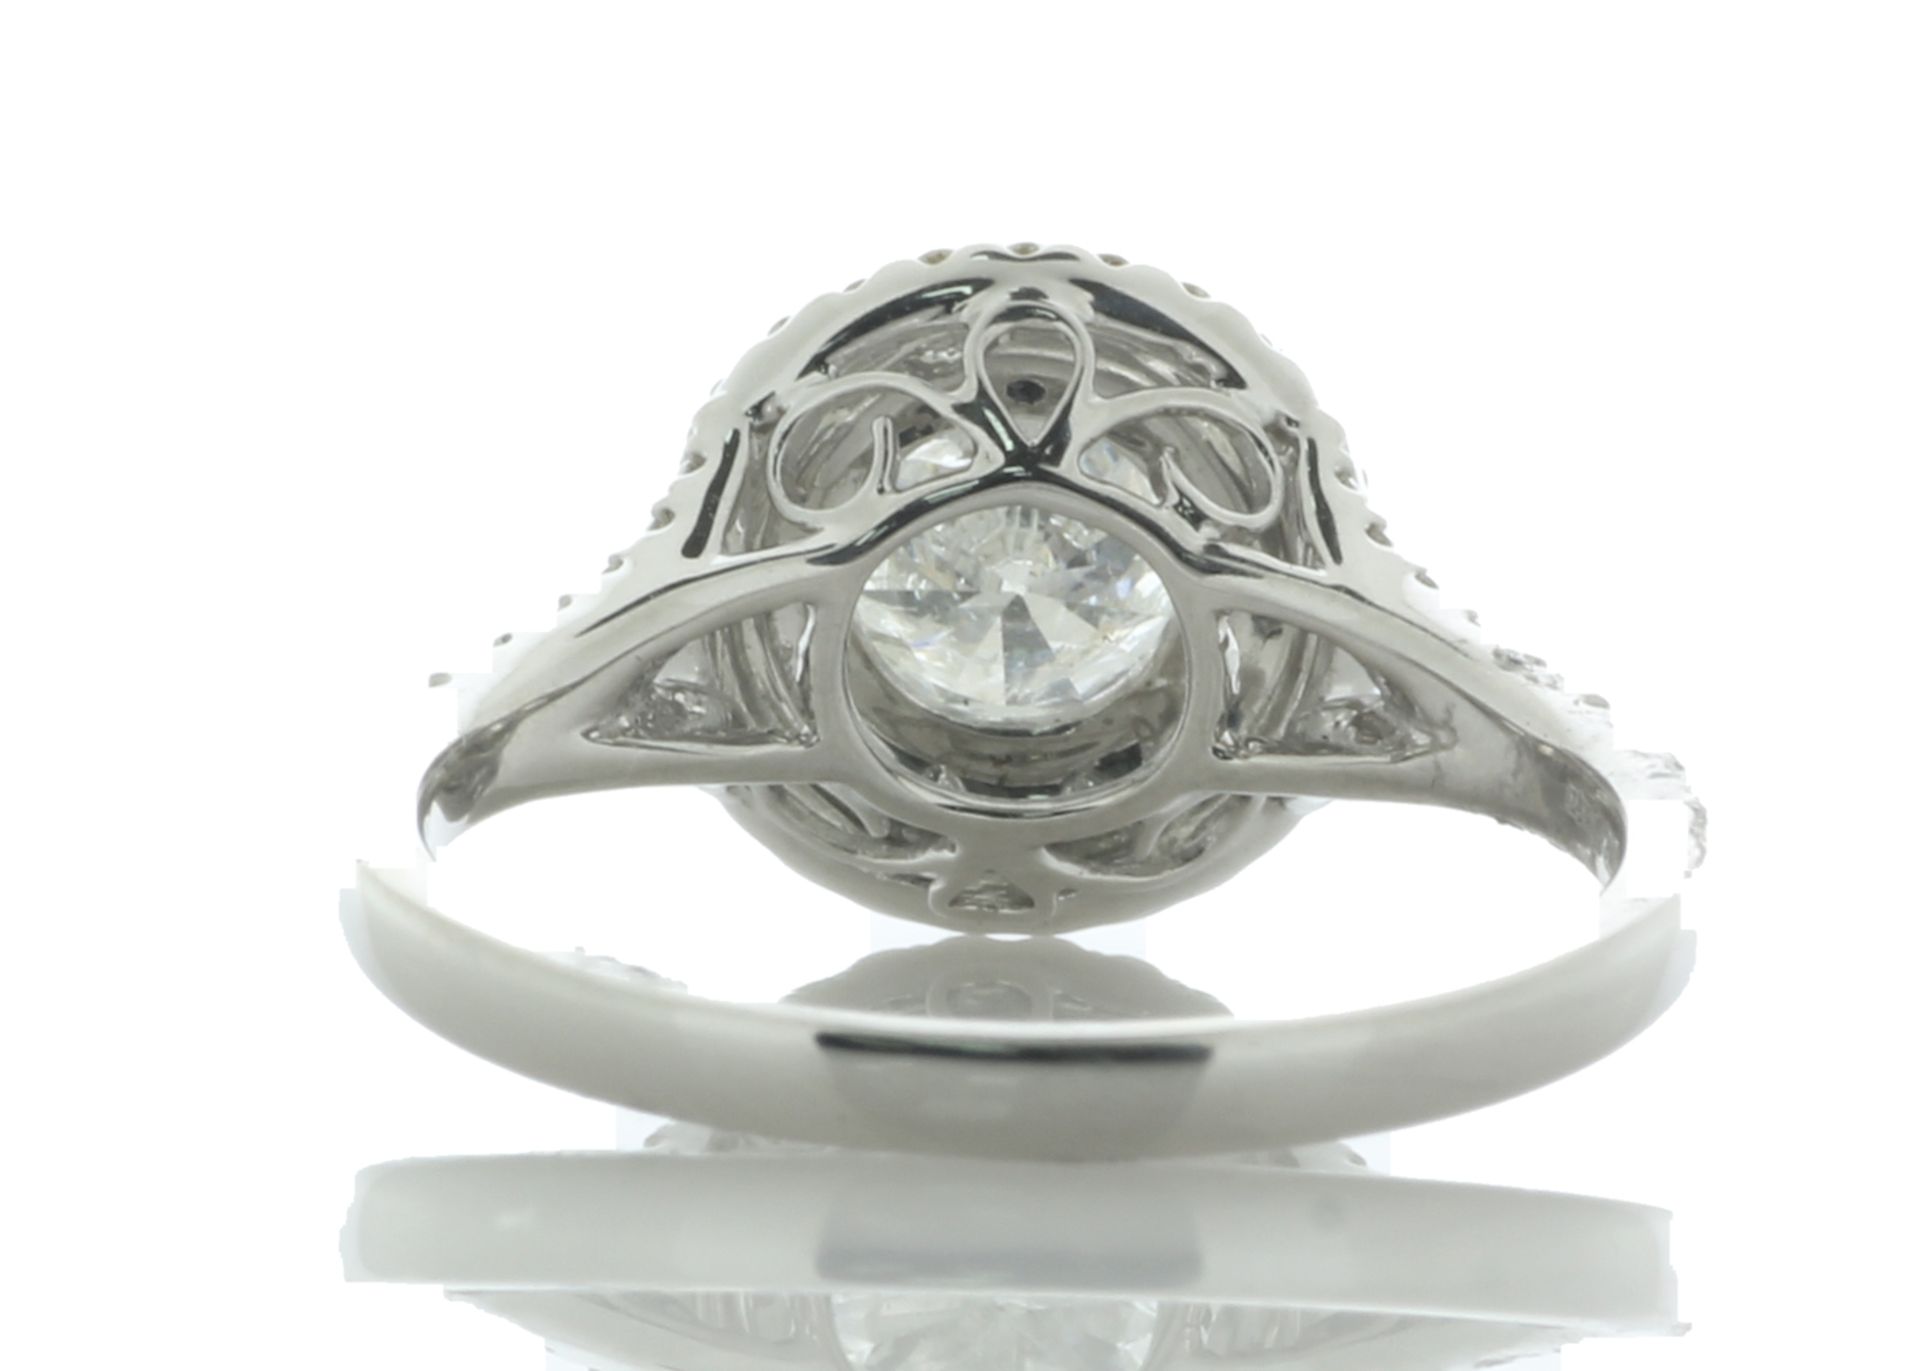 18ct White Gold Single Stone With Halo Setting Ring (0.86) 1.21 Carats - Valued By GIE £16,950. - Image 4 of 5